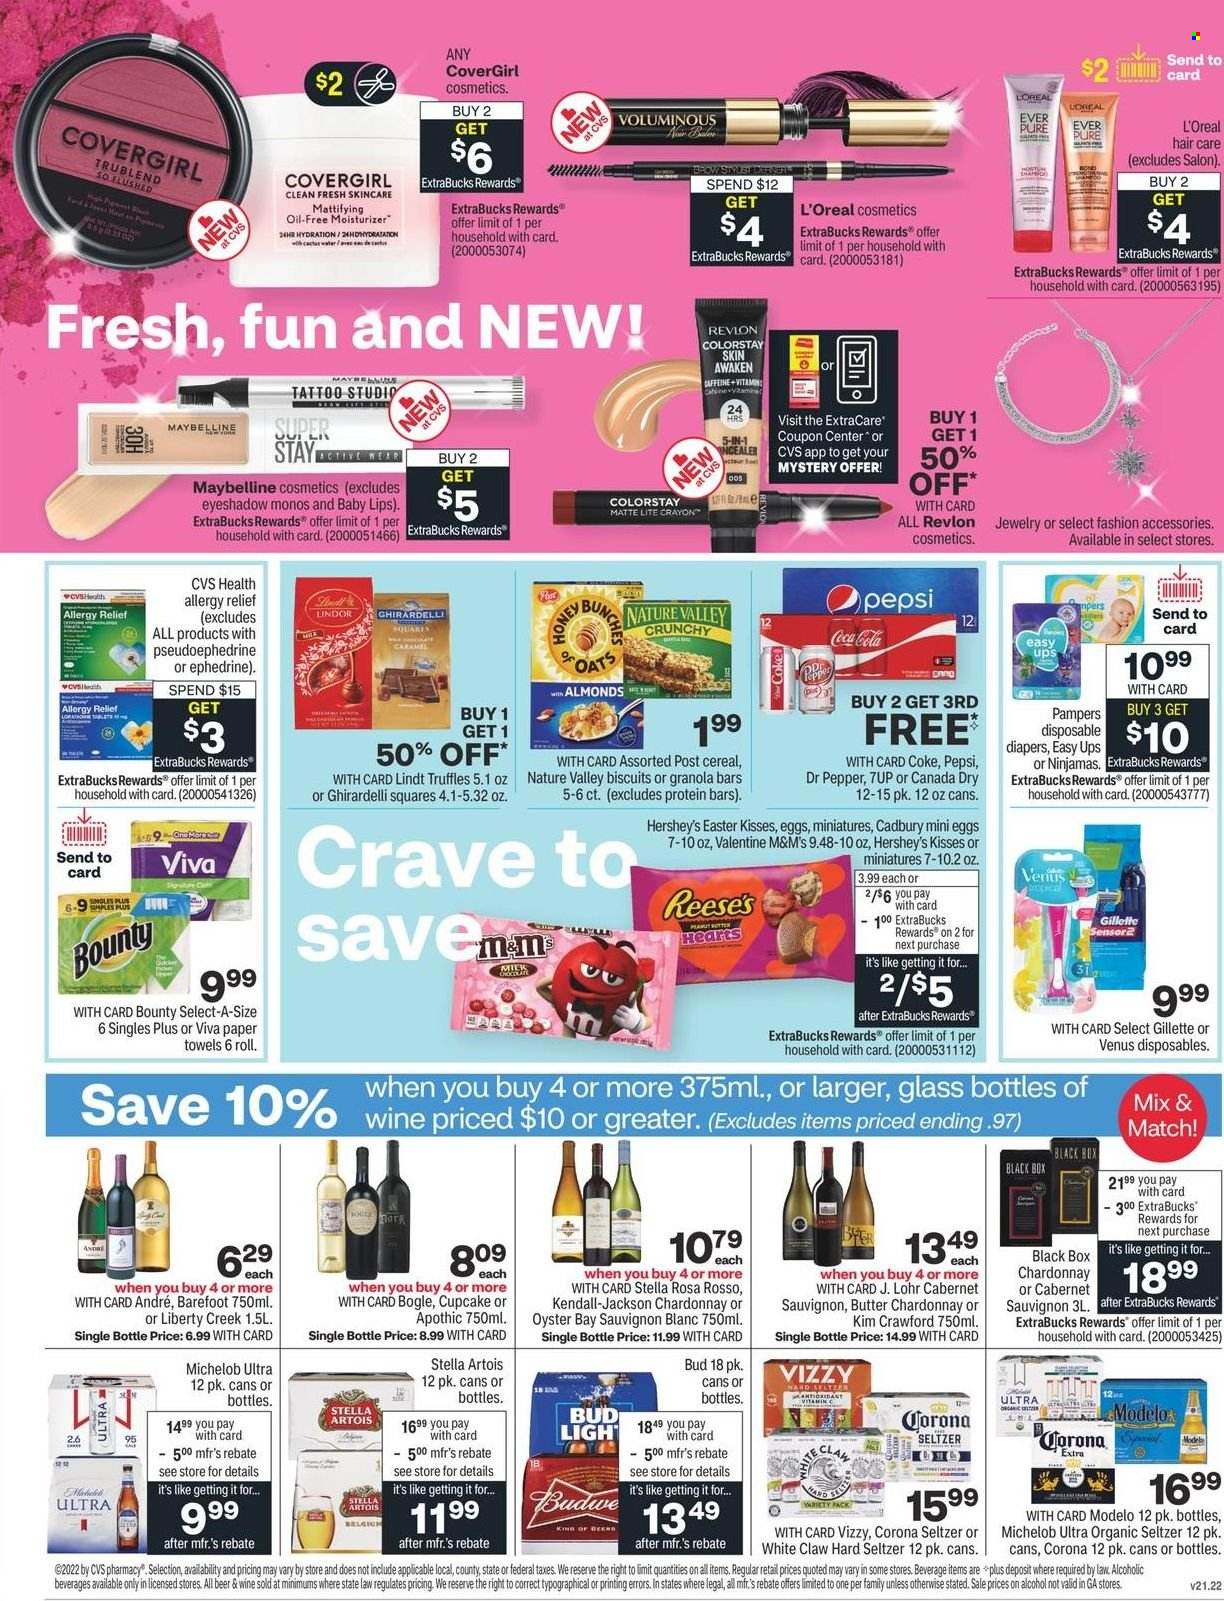 thumbnail - CVS Pharmacy Flyer - 01/23/2022 - 01/29/2022 - Sales products - Reese's, Hershey's, Lindt, Lindor, Bounty, truffles, M&M's, biscuit, Cadbury, Ghirardelli, cereals, oats, protein bar, granola bar, Nature Valley, almonds, Canada Dry, Coca-Cola, Pepsi, Dr. Pepper, 7UP, Cabernet Sauvignon, red wine, white wine, Chardonnay, wine, alcohol, Sauvignon Blanc, White Claw, Hard Seltzer, Pampers, nappies, kitchen towels, paper towels, L’Oréal, moisturizer, Revlon, Maybelline, Gillette, Venus, allergy relief, beer, Bud Light, Corona Extra, Modelo, eyeshadow, Stella Artois, Michelob. Page 2.